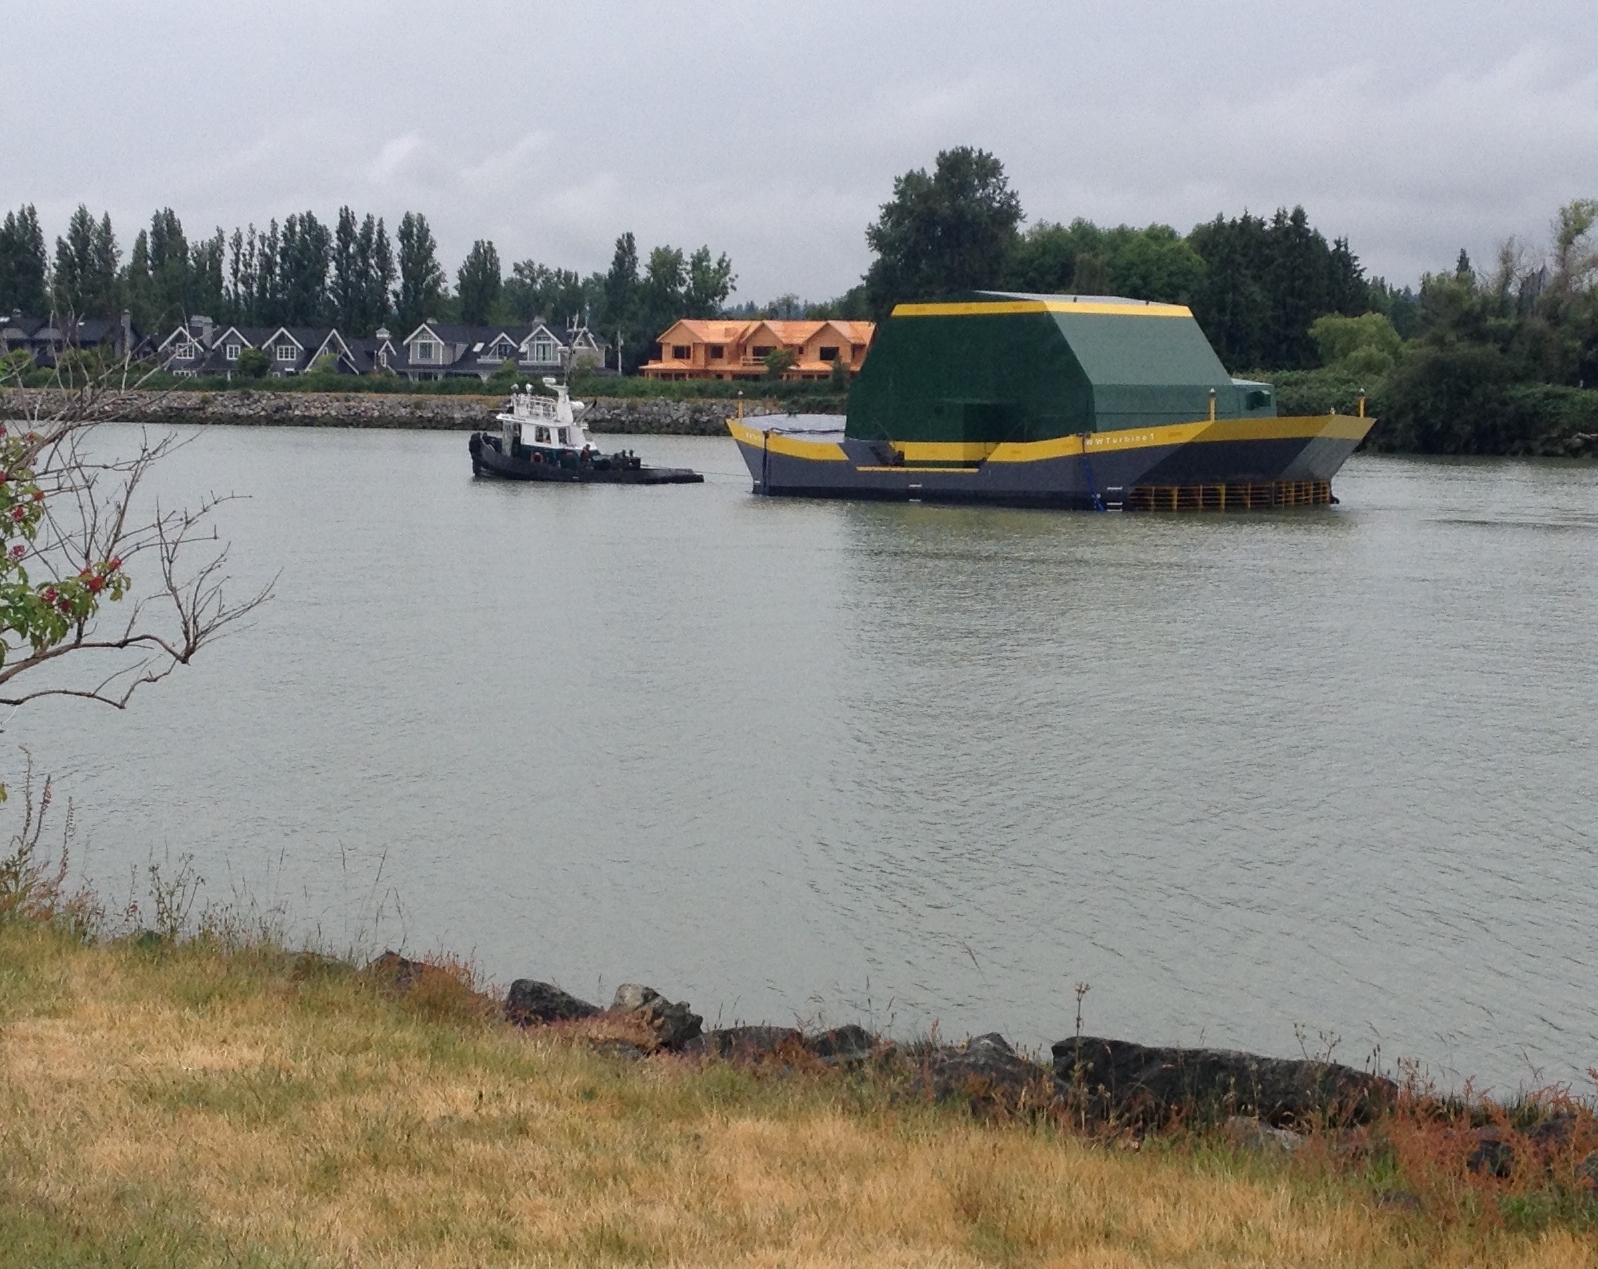 The Water Wall Turbine being towed from Richmond, BC along the North Arm of the Fraser River, towards Dent Island.